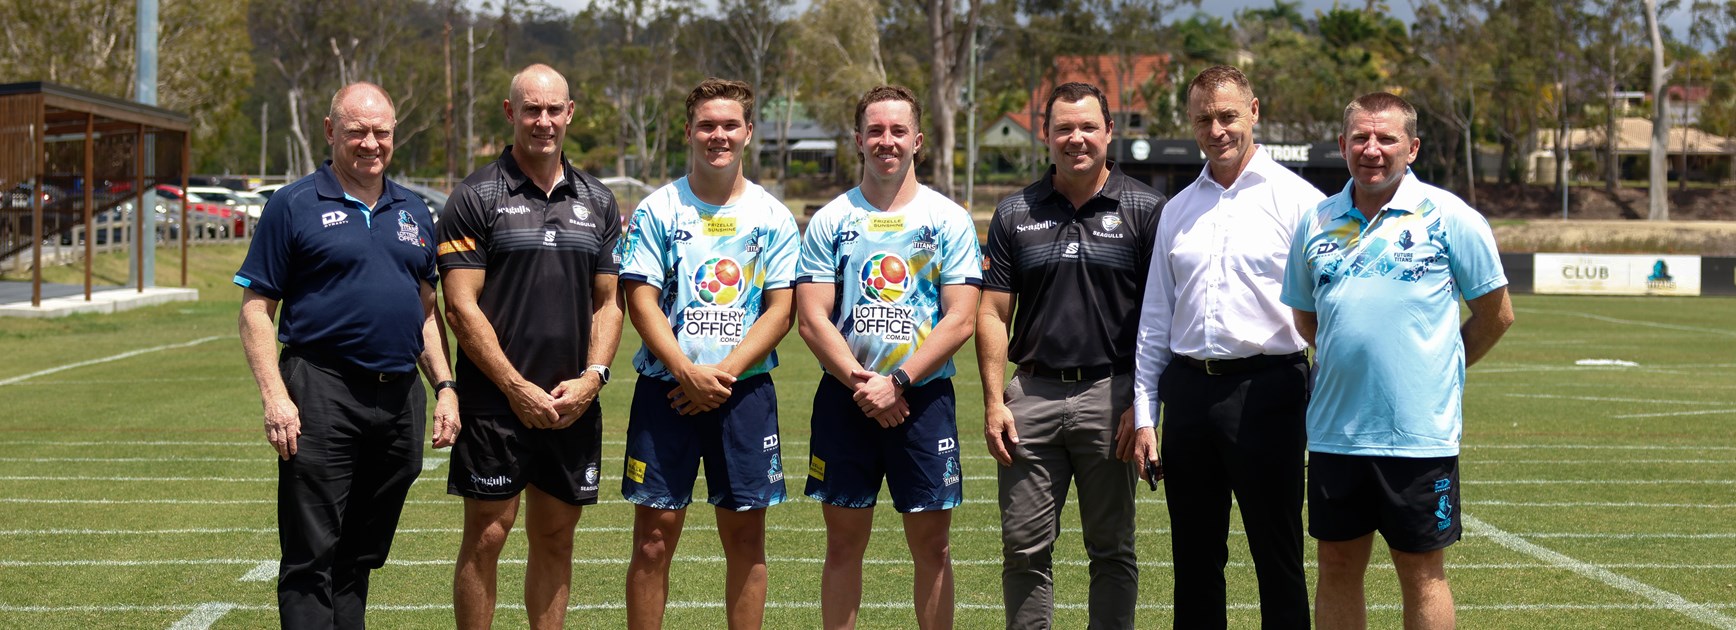 Titans join with Tweed to further boost development in Northern Rivers